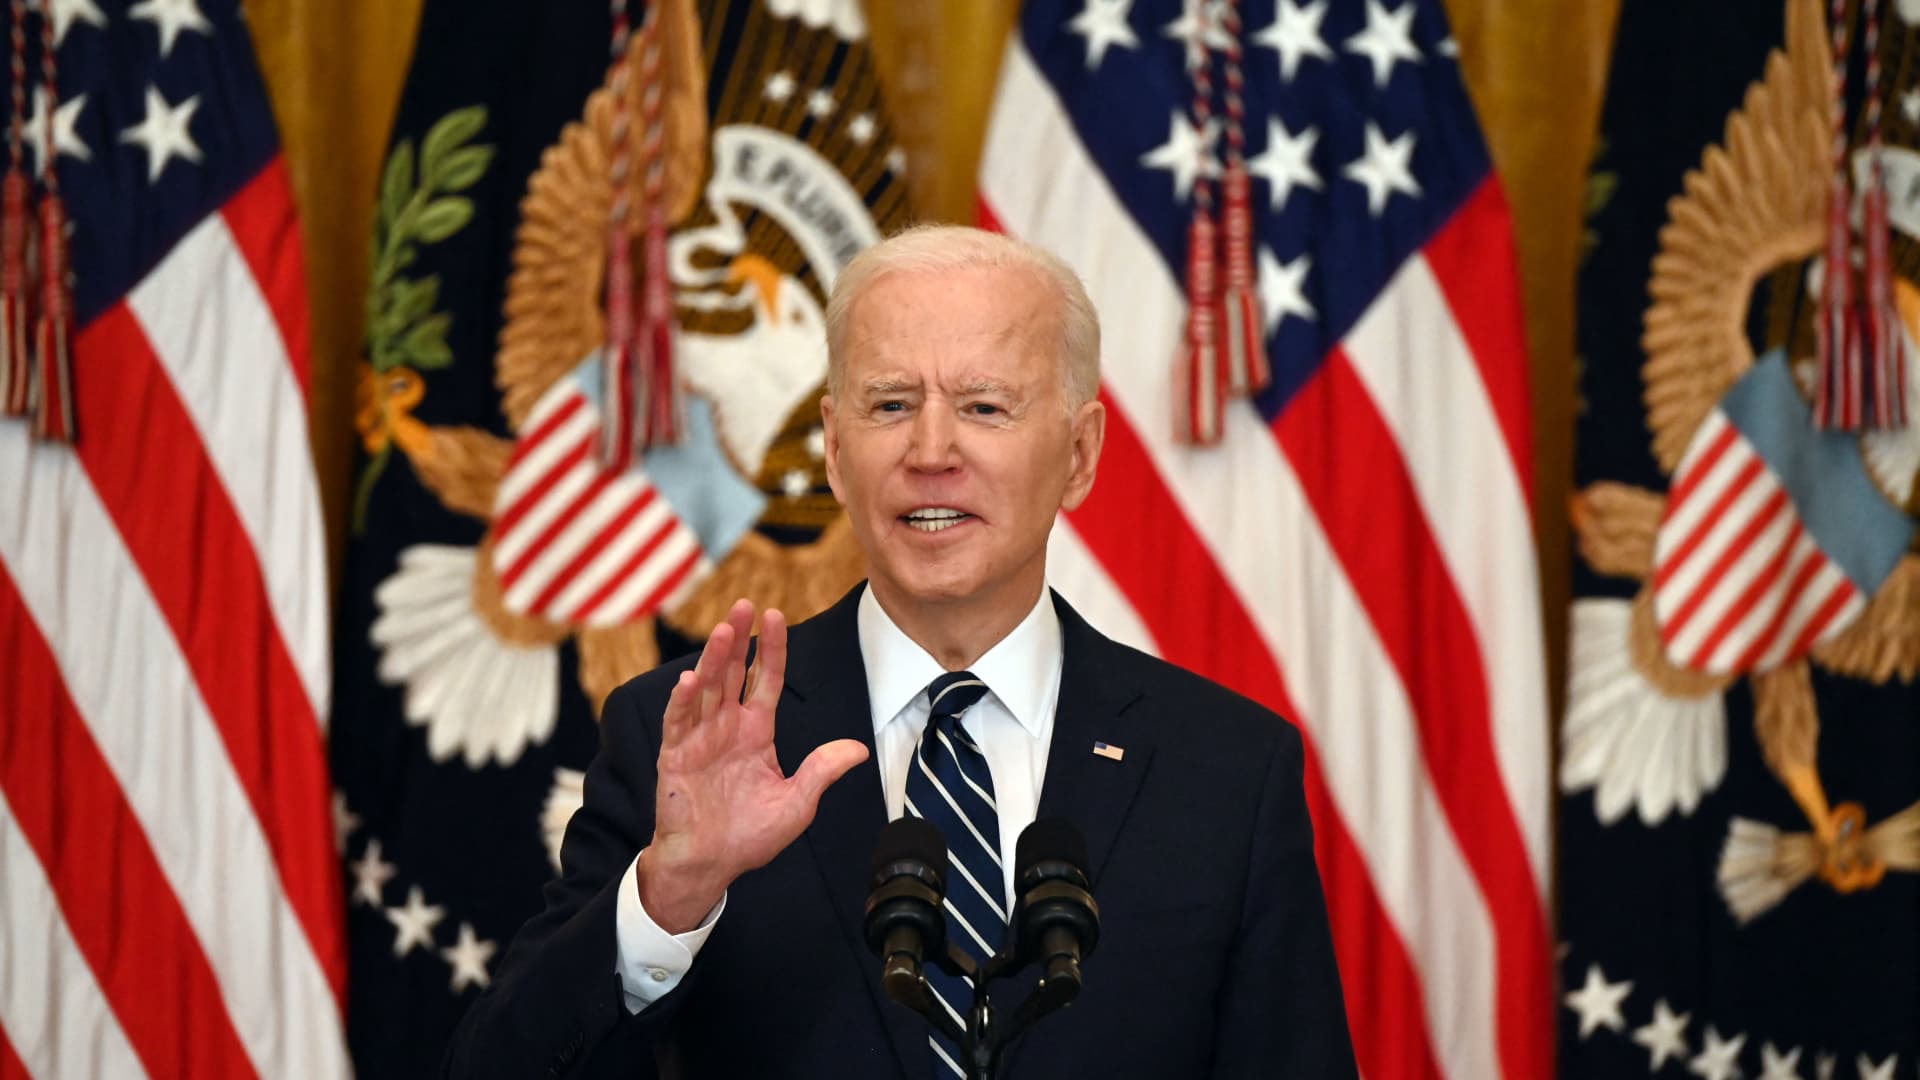 North Korea could launch a missile or nuclear test to 'overshadow' Biden's first Asia trip